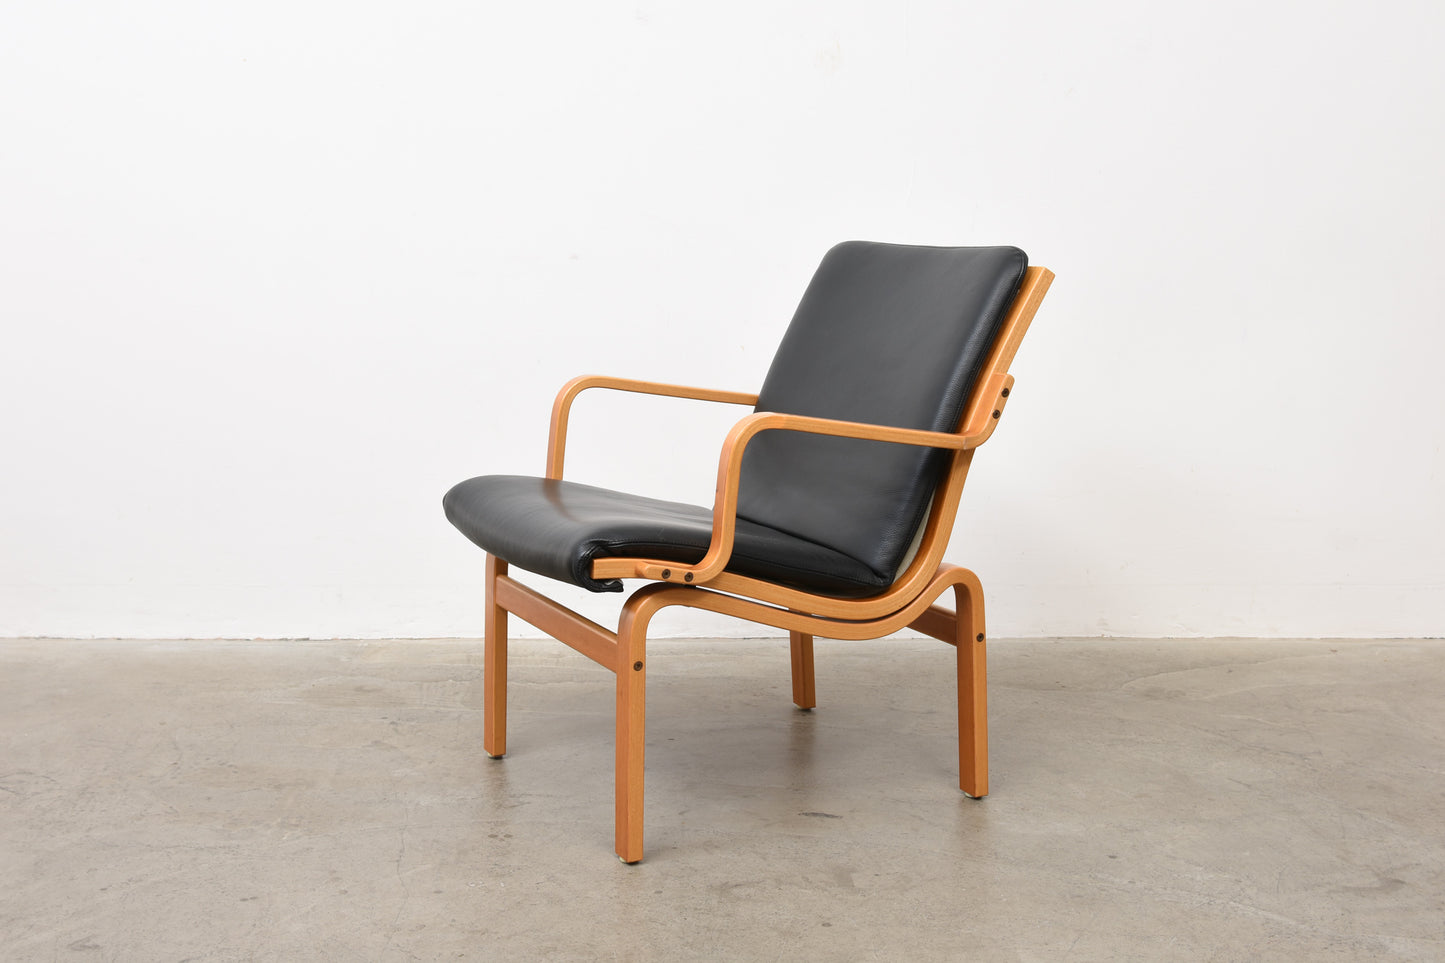 1980s beech + leather lounger